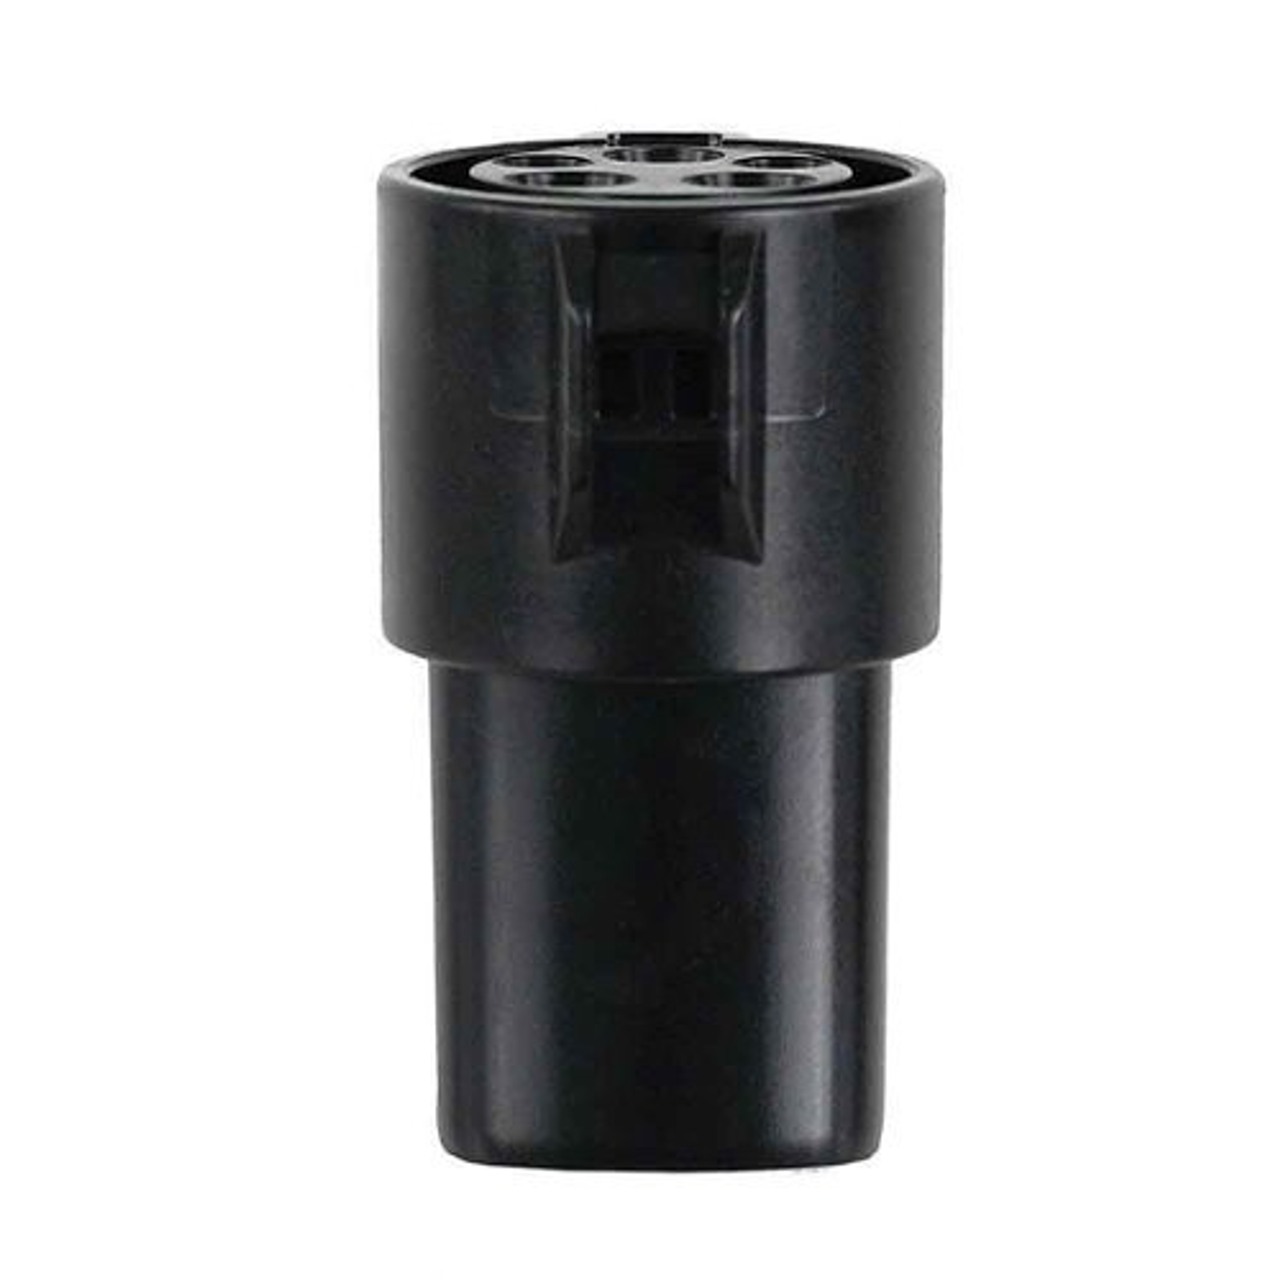 Schumacher Electric - J1772 Standard Electric Vehicle Connector to Tesla Adapter for Electric Vehicle Charger - Black